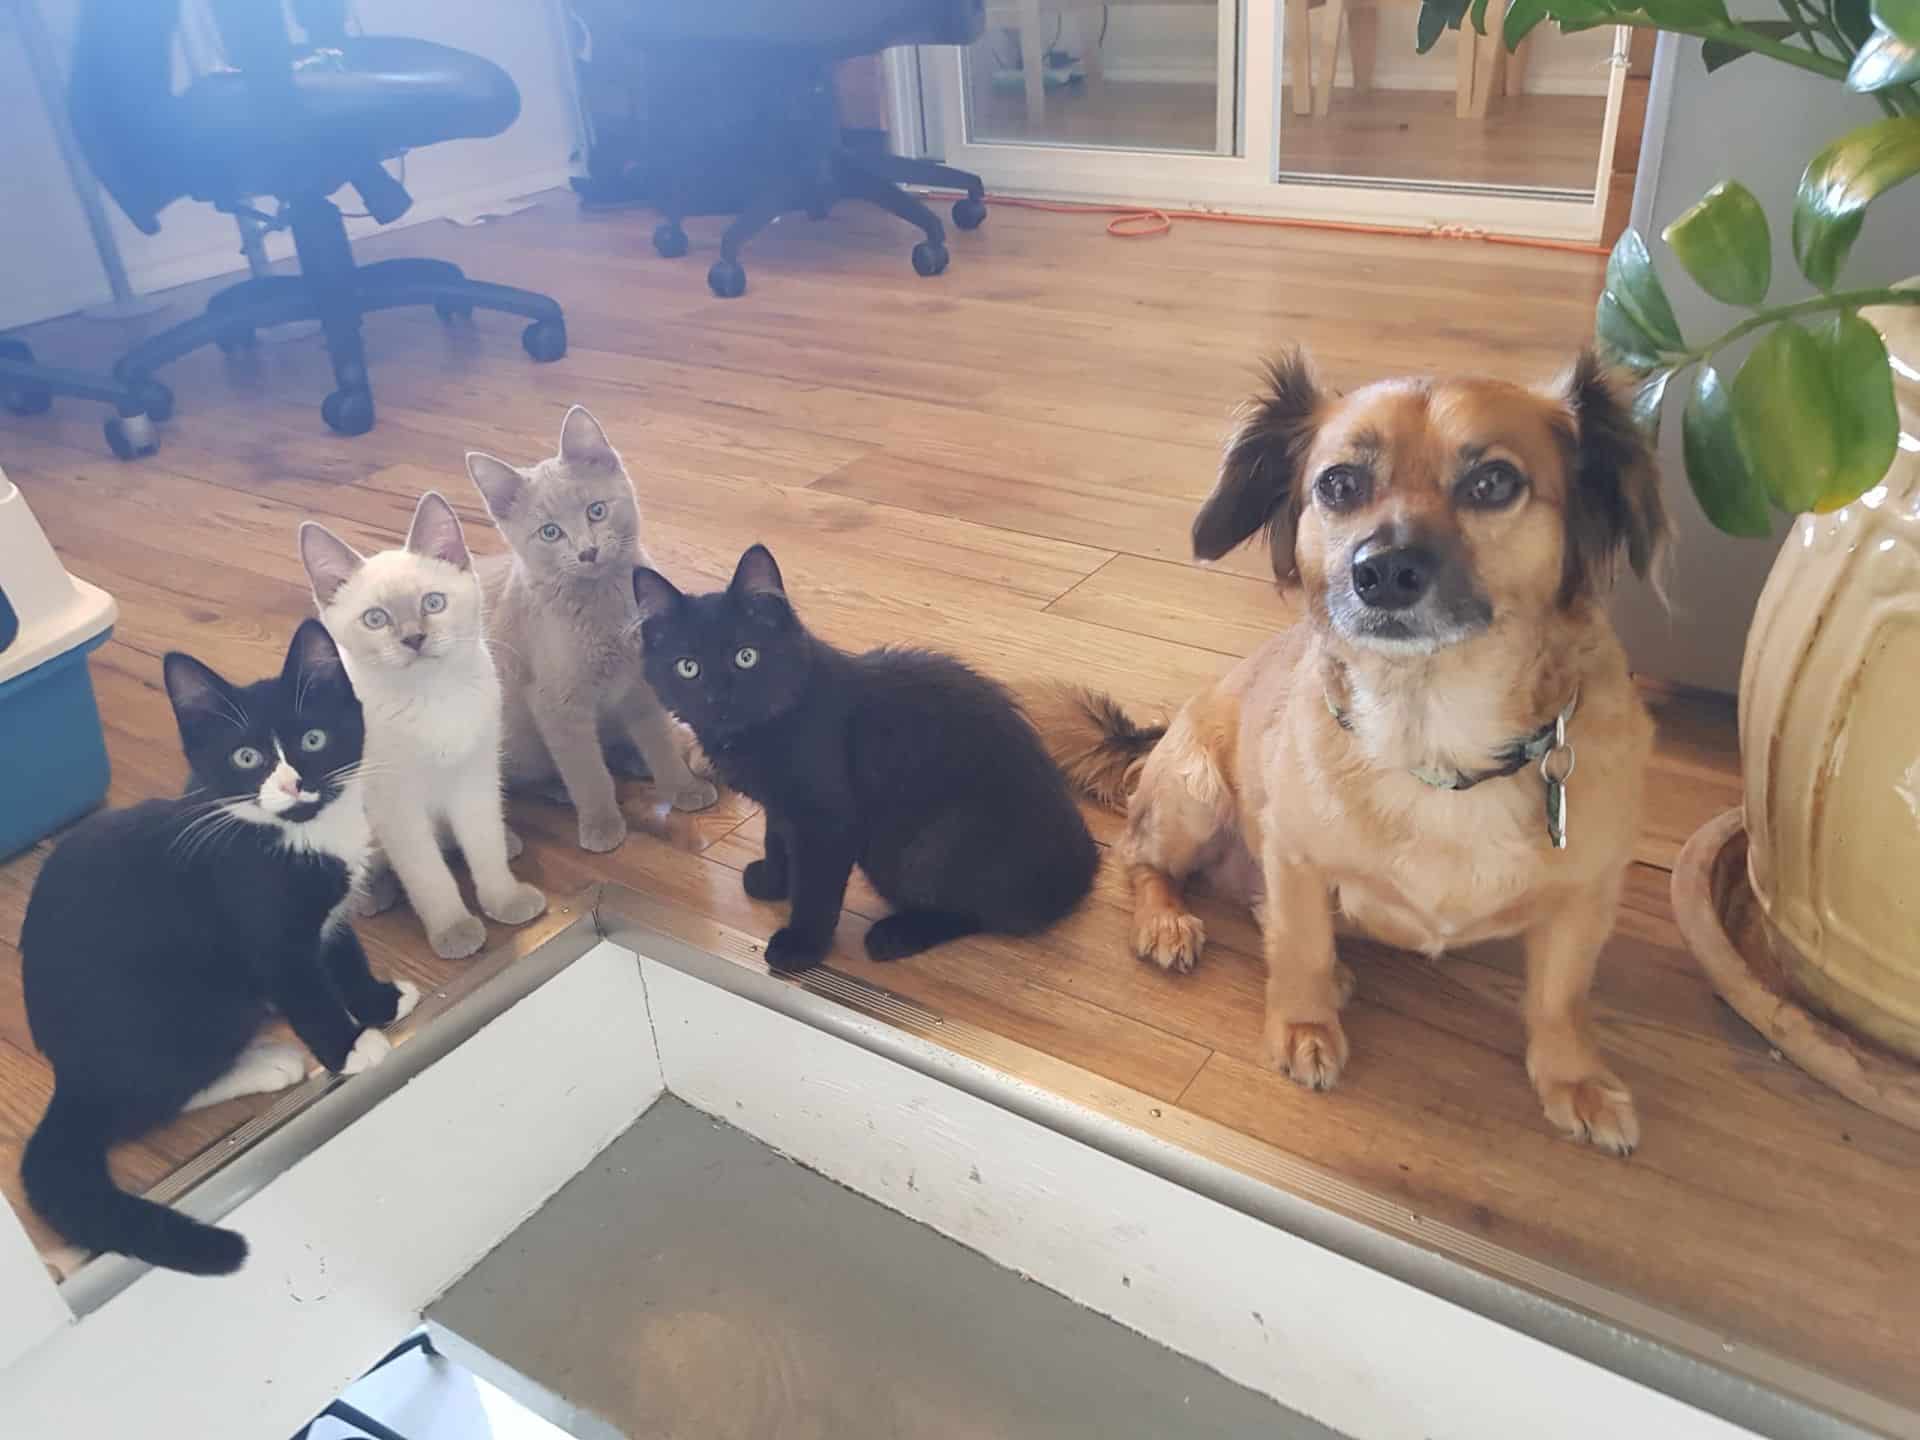 war room most pet friendly office in canada bobo and kittens